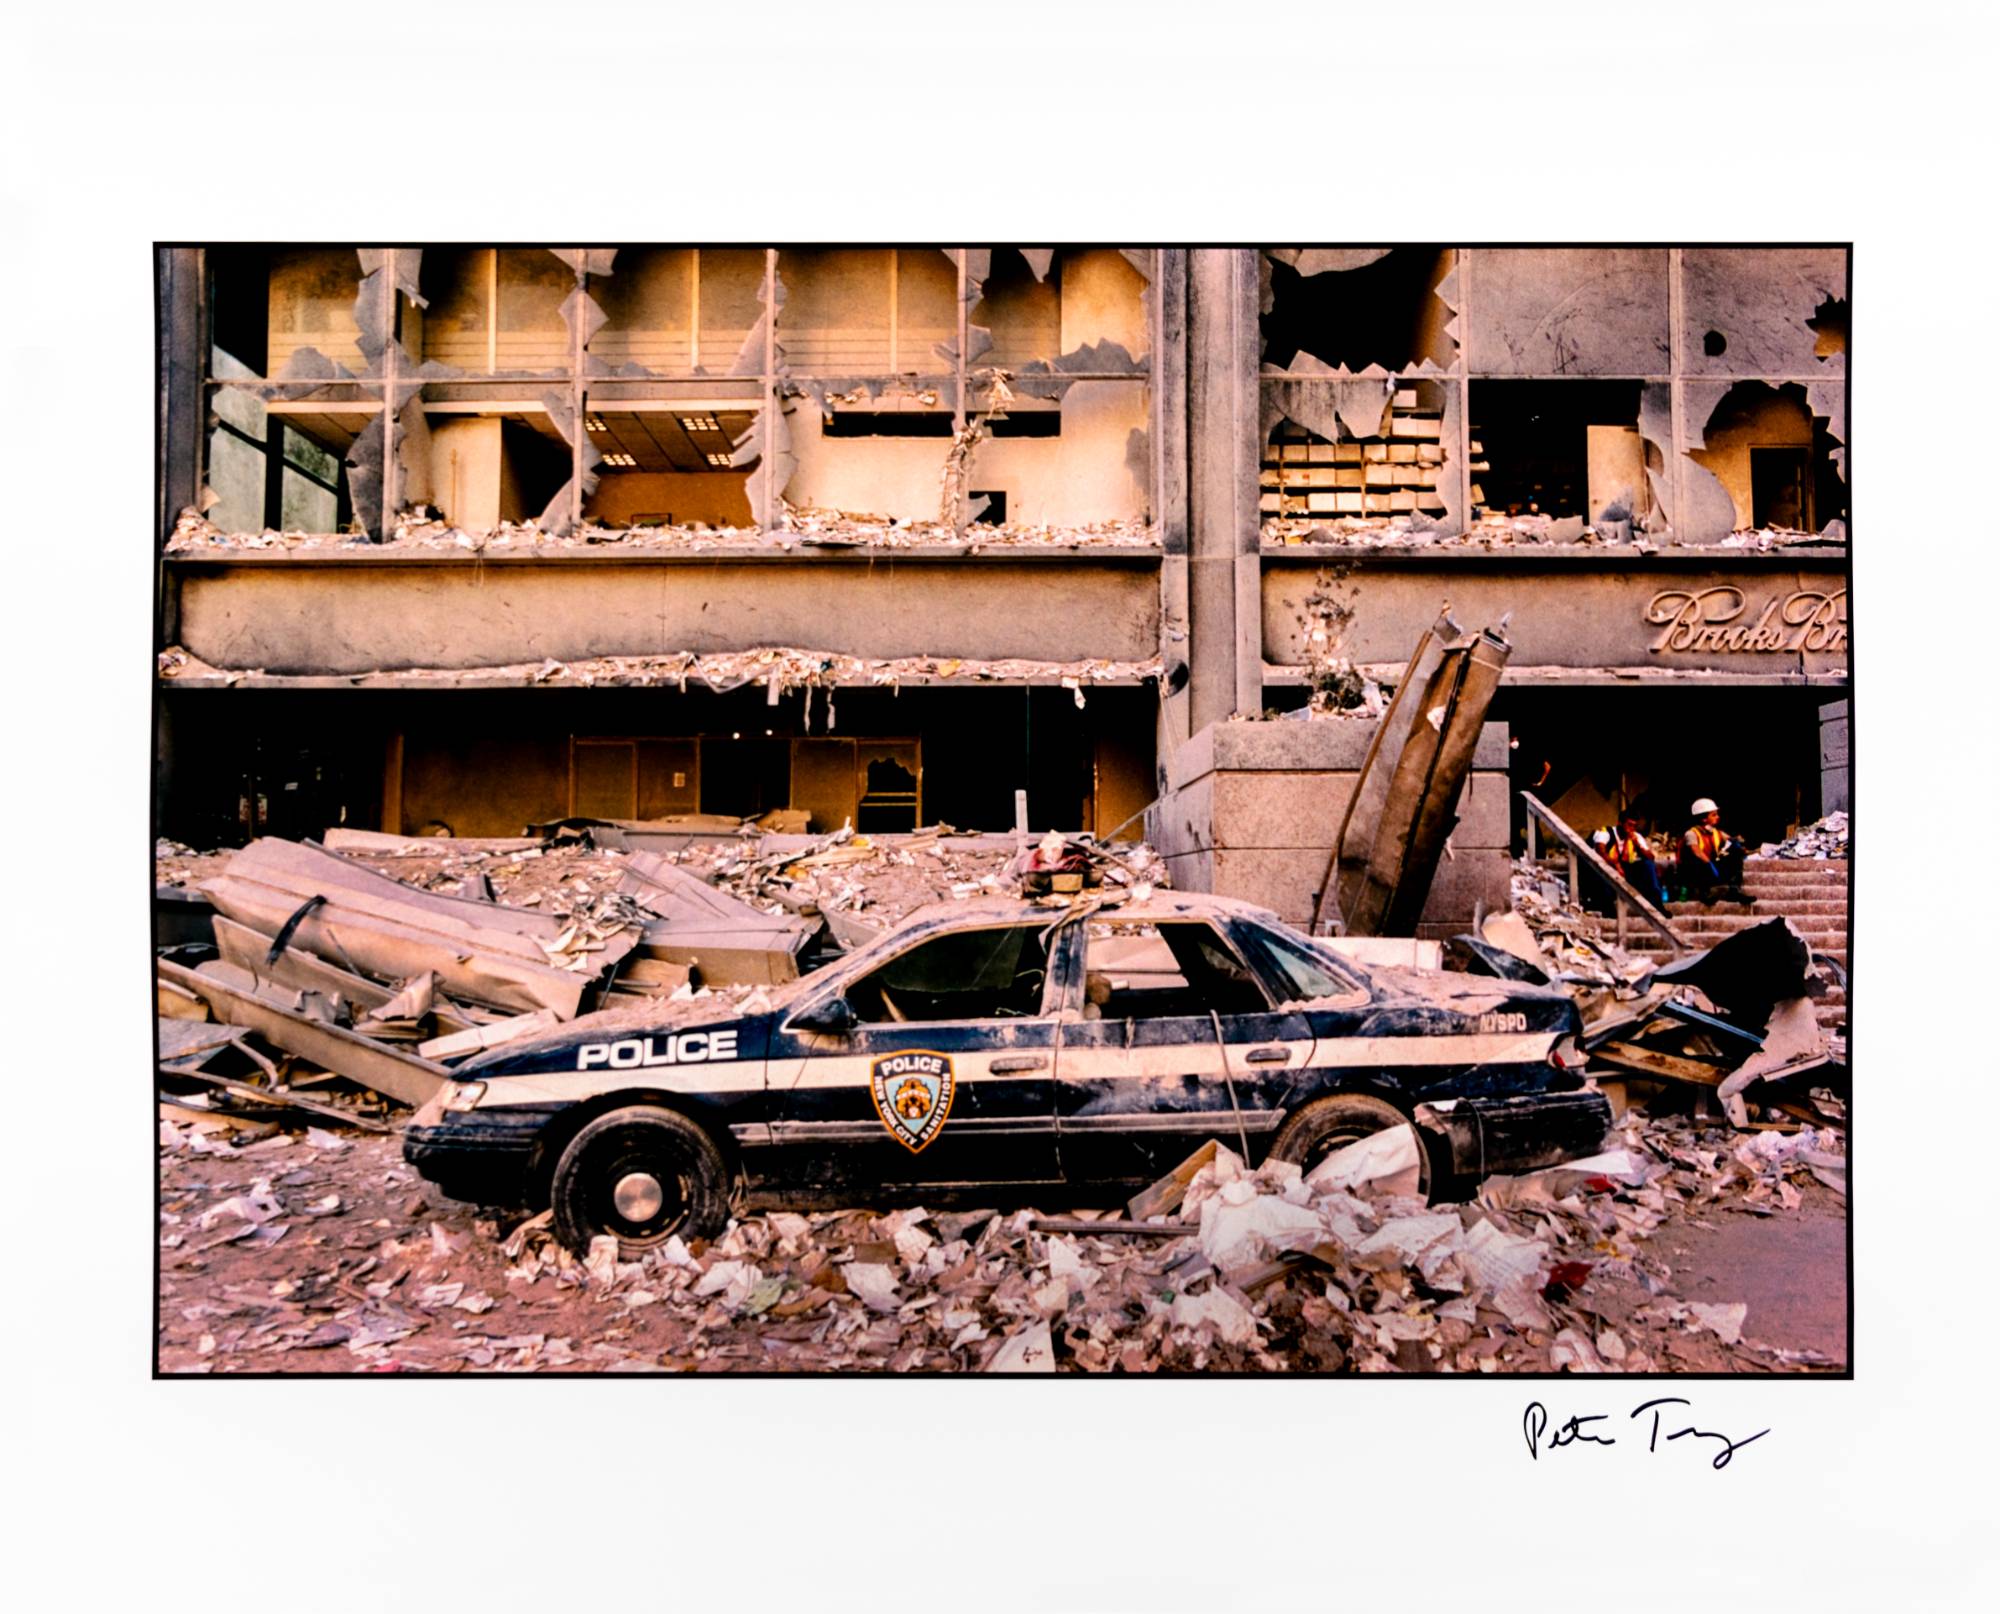 police car covered in rubble in front of a destroyed office building in New York City the day after 9/11